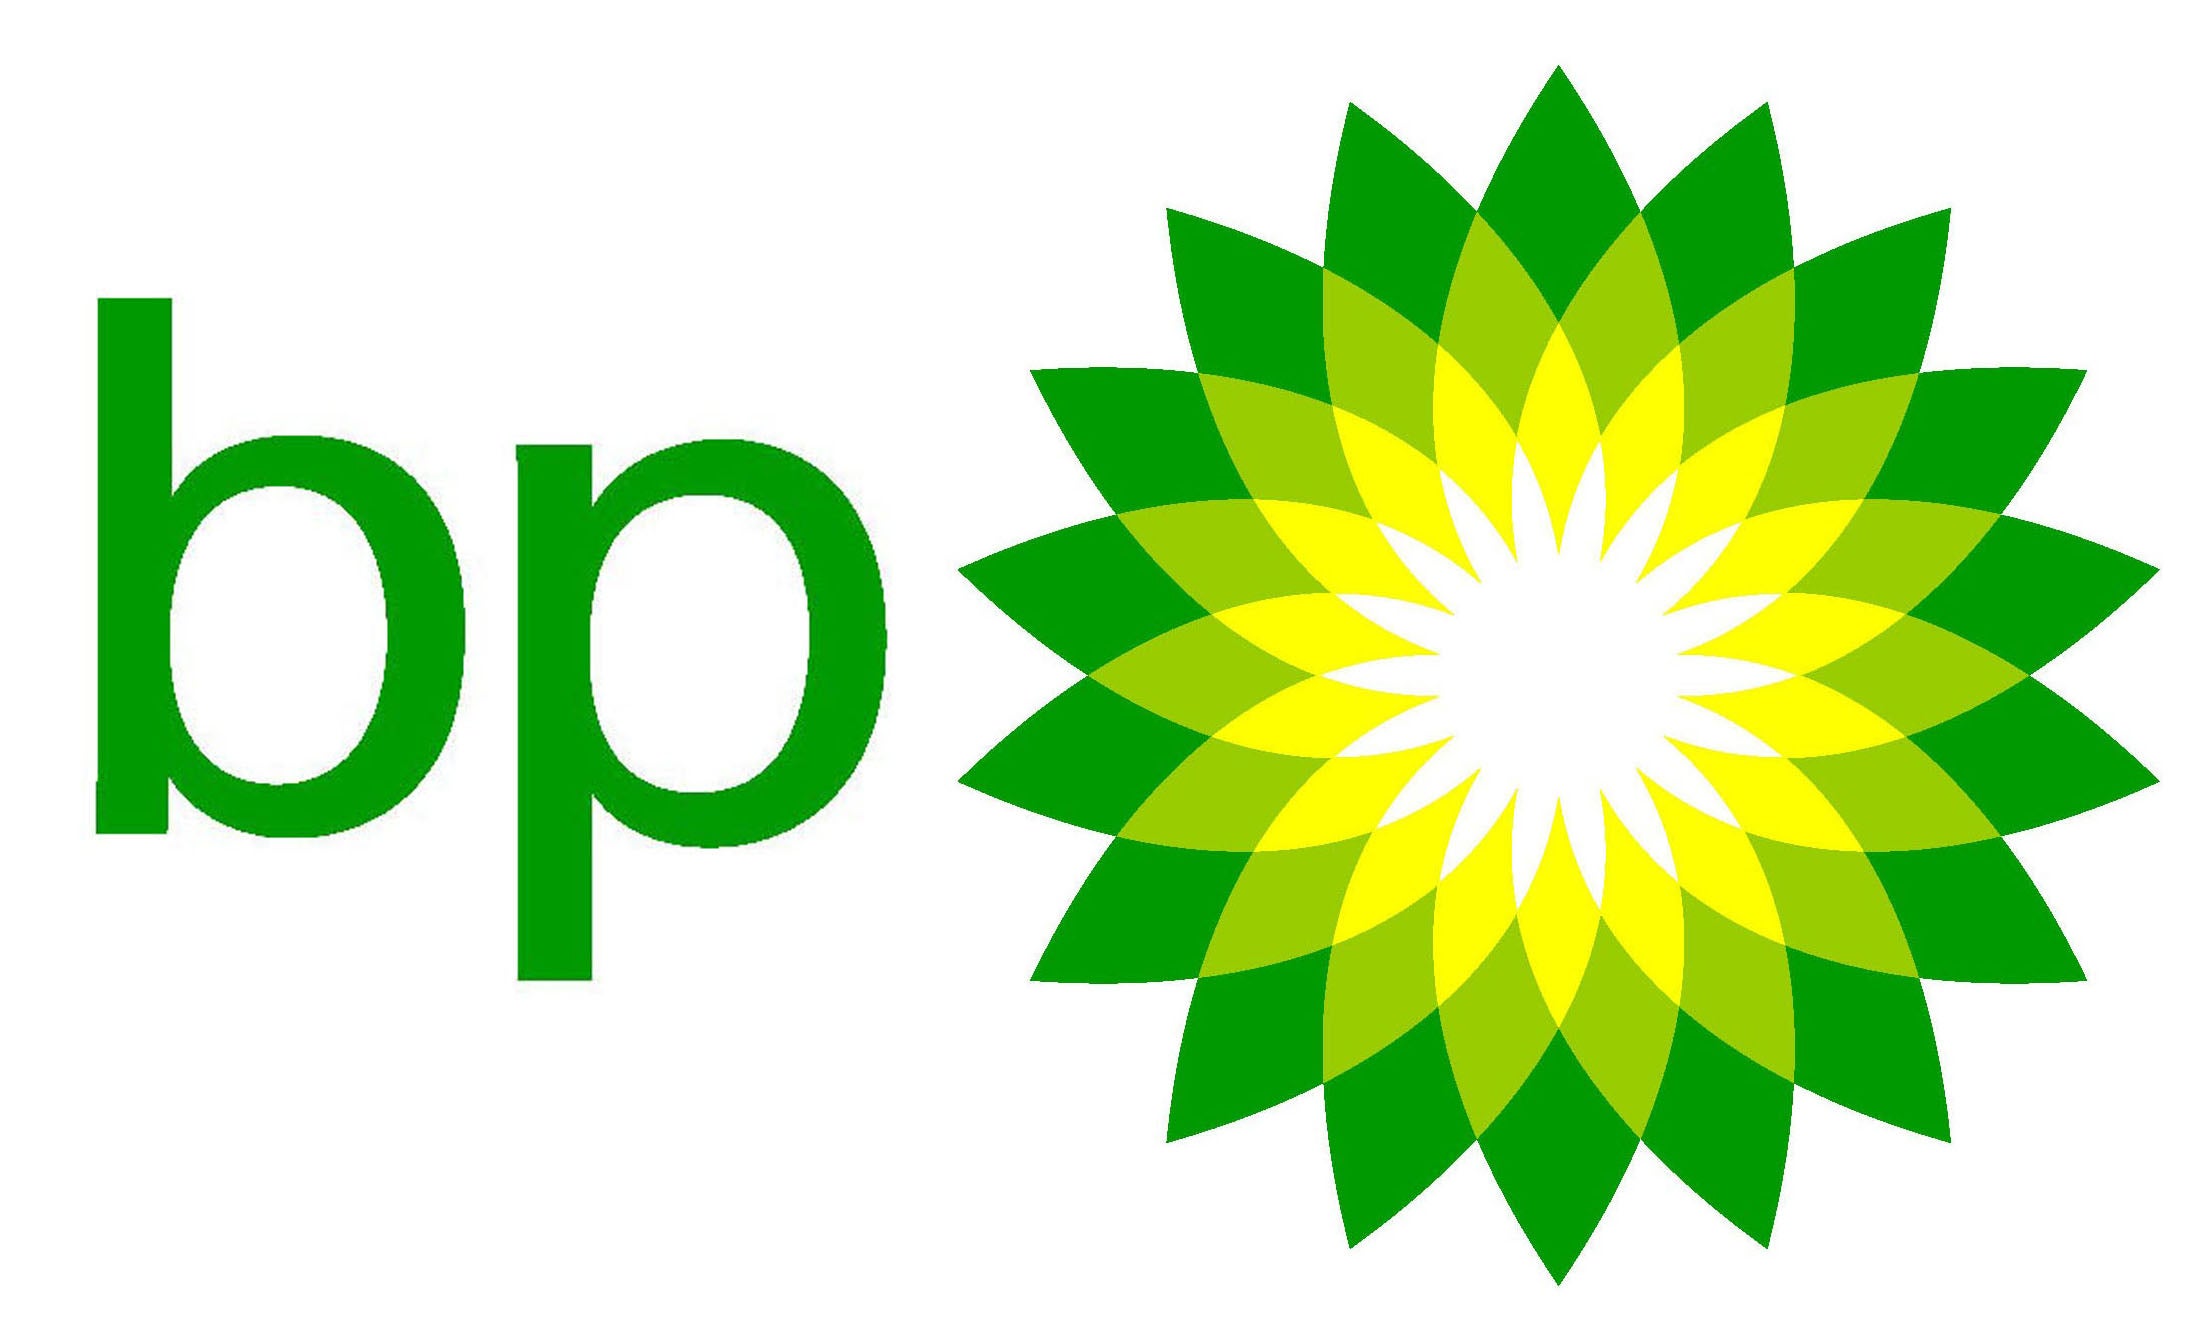 BP extends business process service contract with Accenture